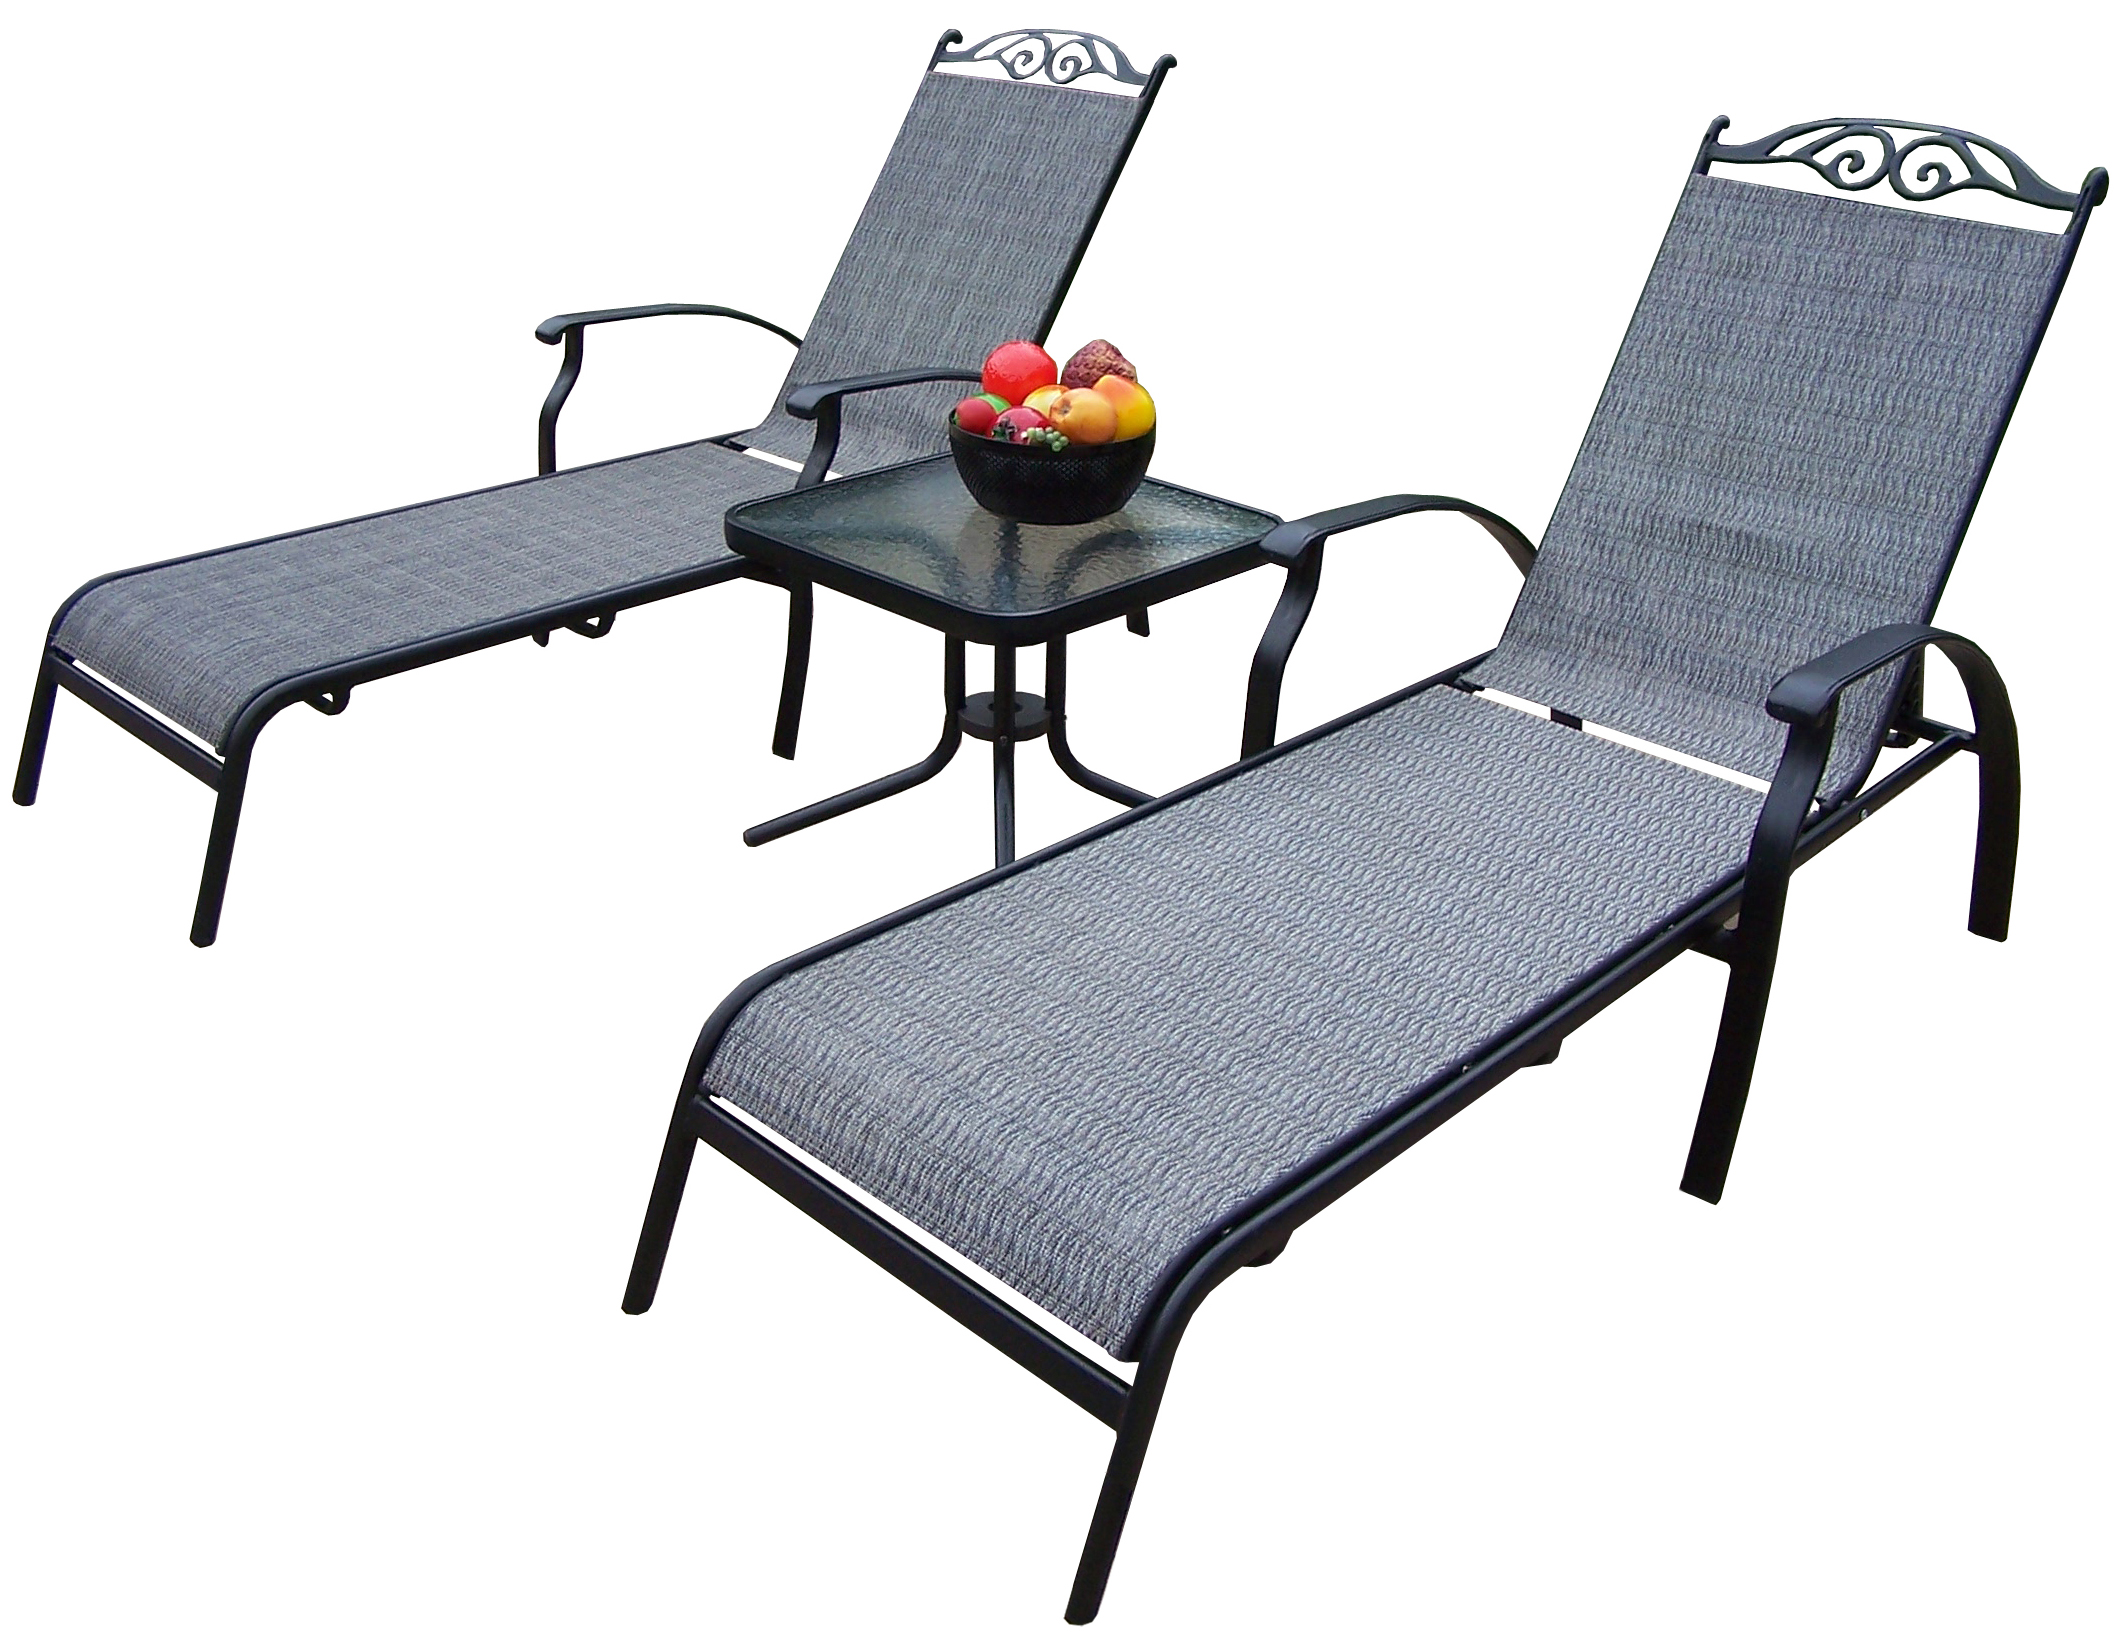 Oakland Living Aluminum-Framed Sling Chaise Lounge Set w/ Two Chaise Lounges and a 20 inch Side Table